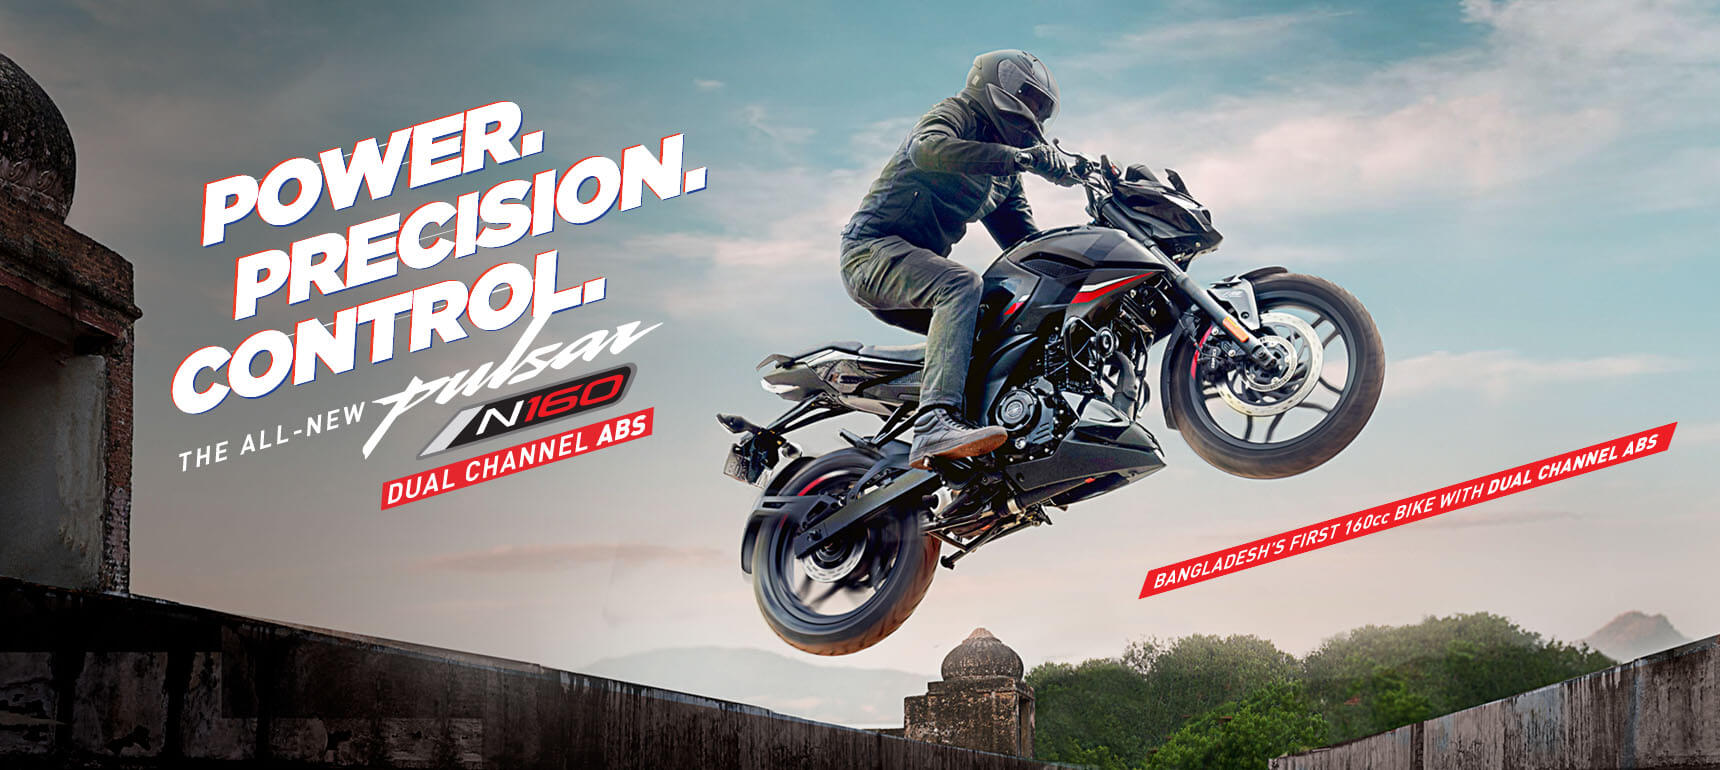 The all-new Pulsar N160 Bangladesh's first 160 cc with Dual Channel ABS is always on Thrill Mode